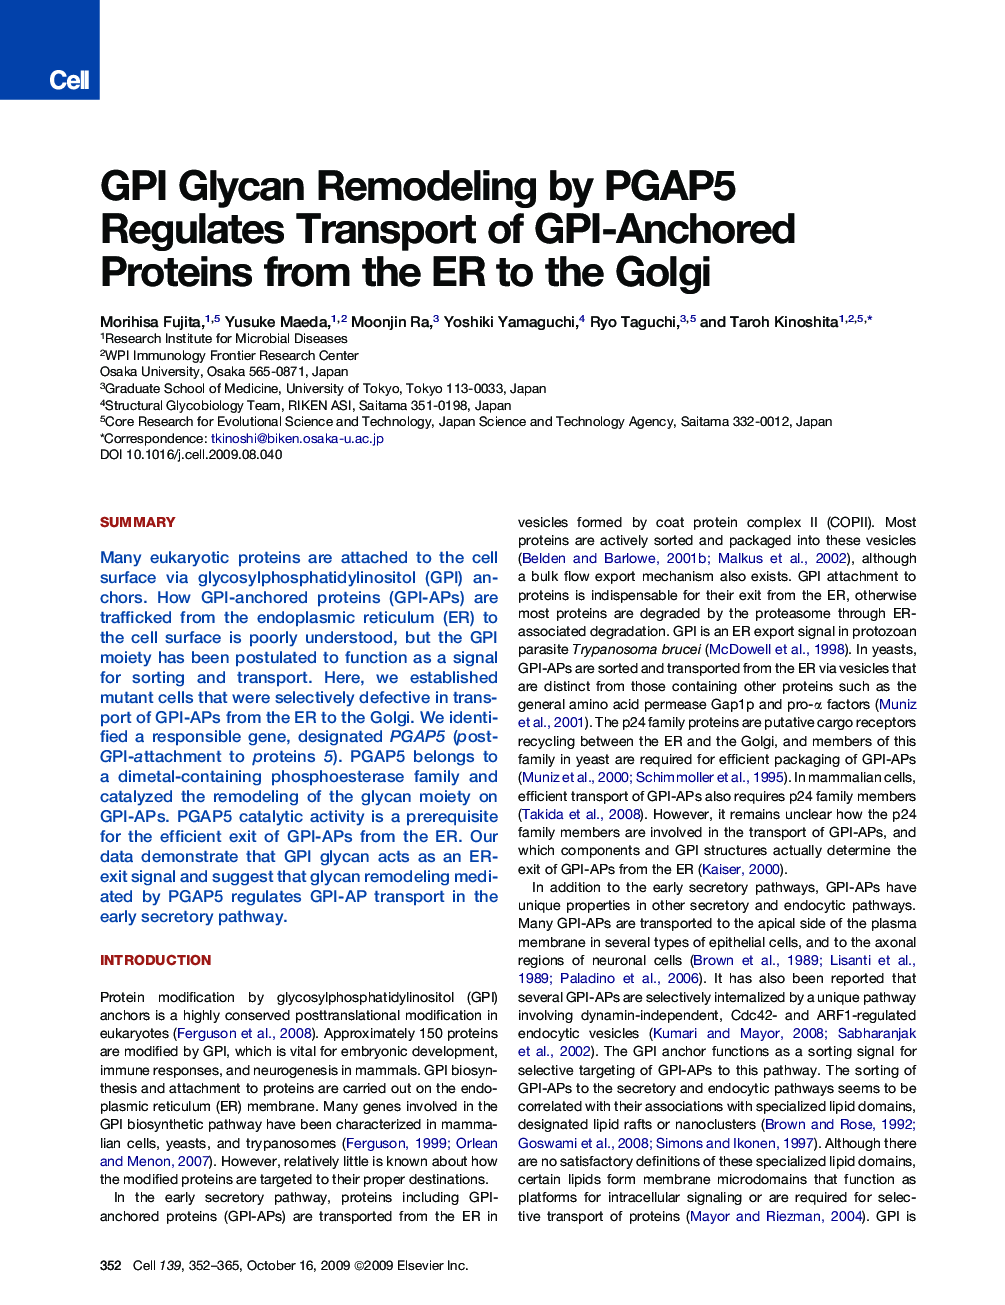 GPI Glycan Remodeling by PGAP5 Regulates Transport of GPI-Anchored Proteins from the ER to the Golgi